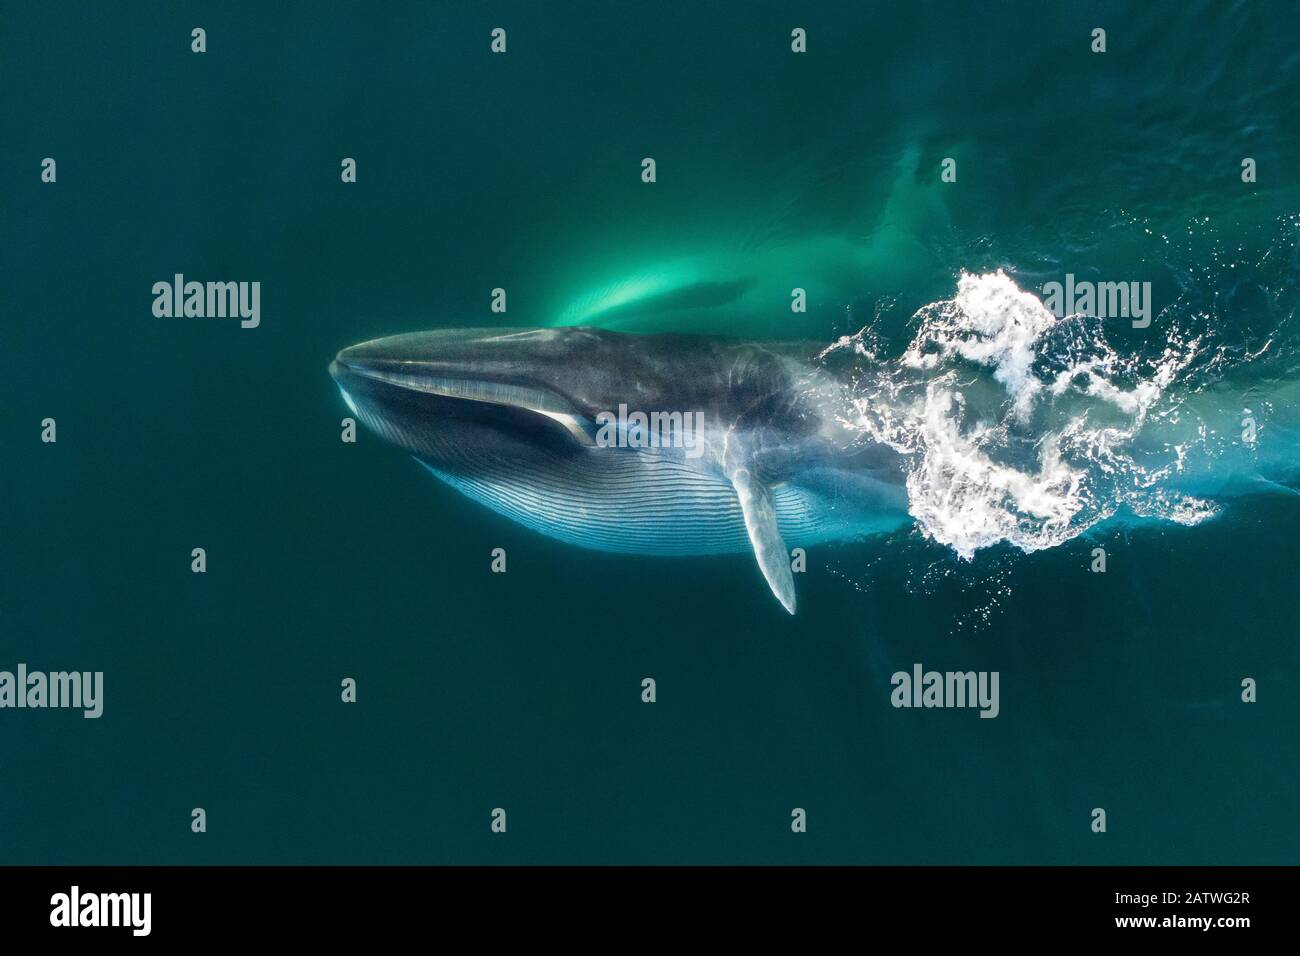 Stock photo of Aerial view of Fin whale (Balaenoptera physalus)  lunge-feeding, with mouth. Available for sale on